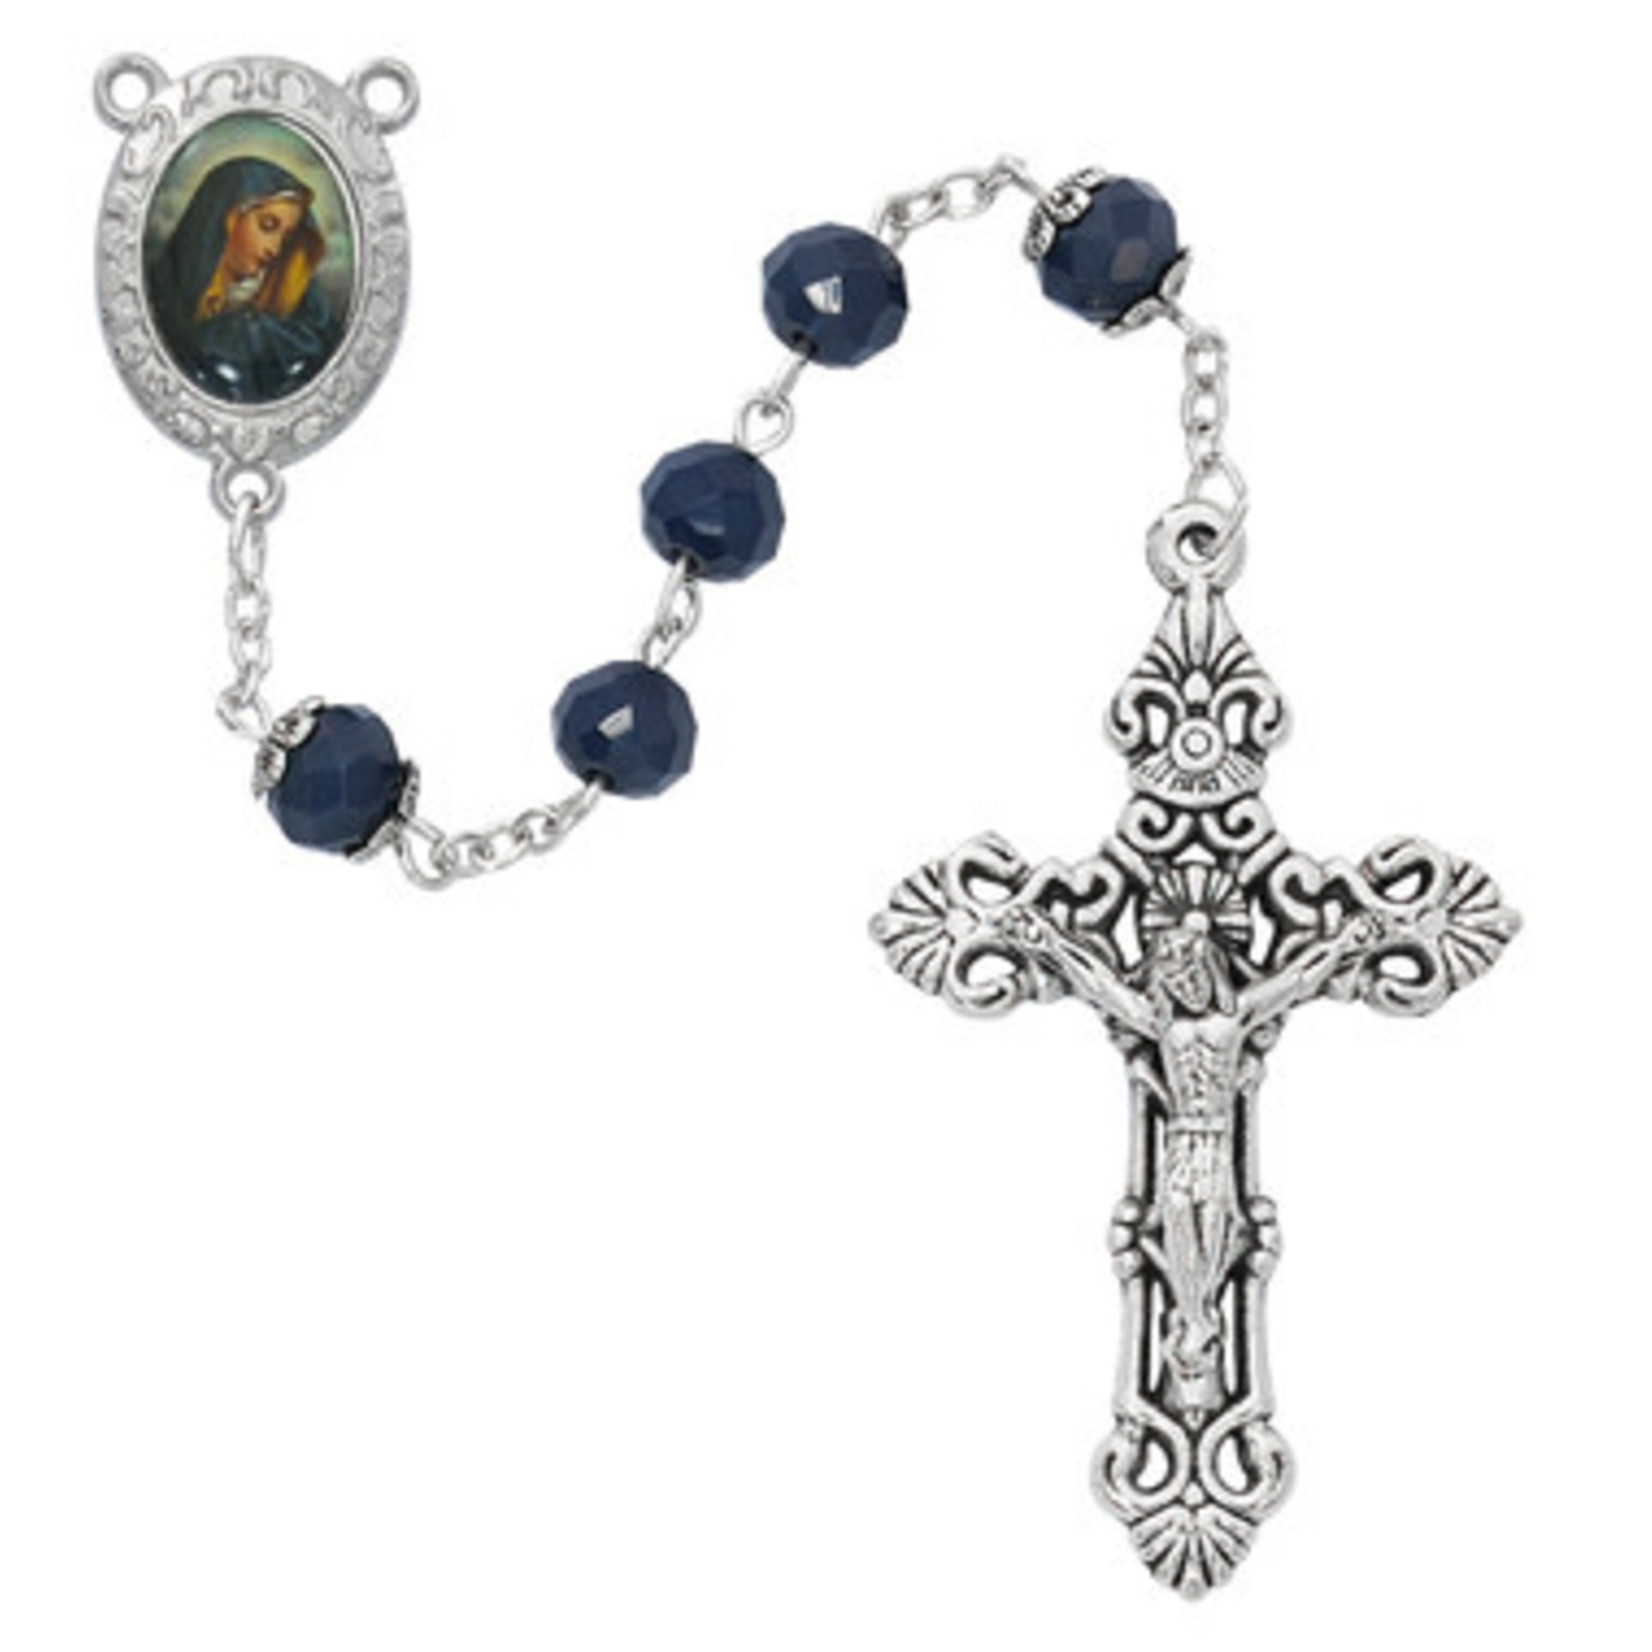 Our Lady of Sorrows Navy Blue Bead Rosary